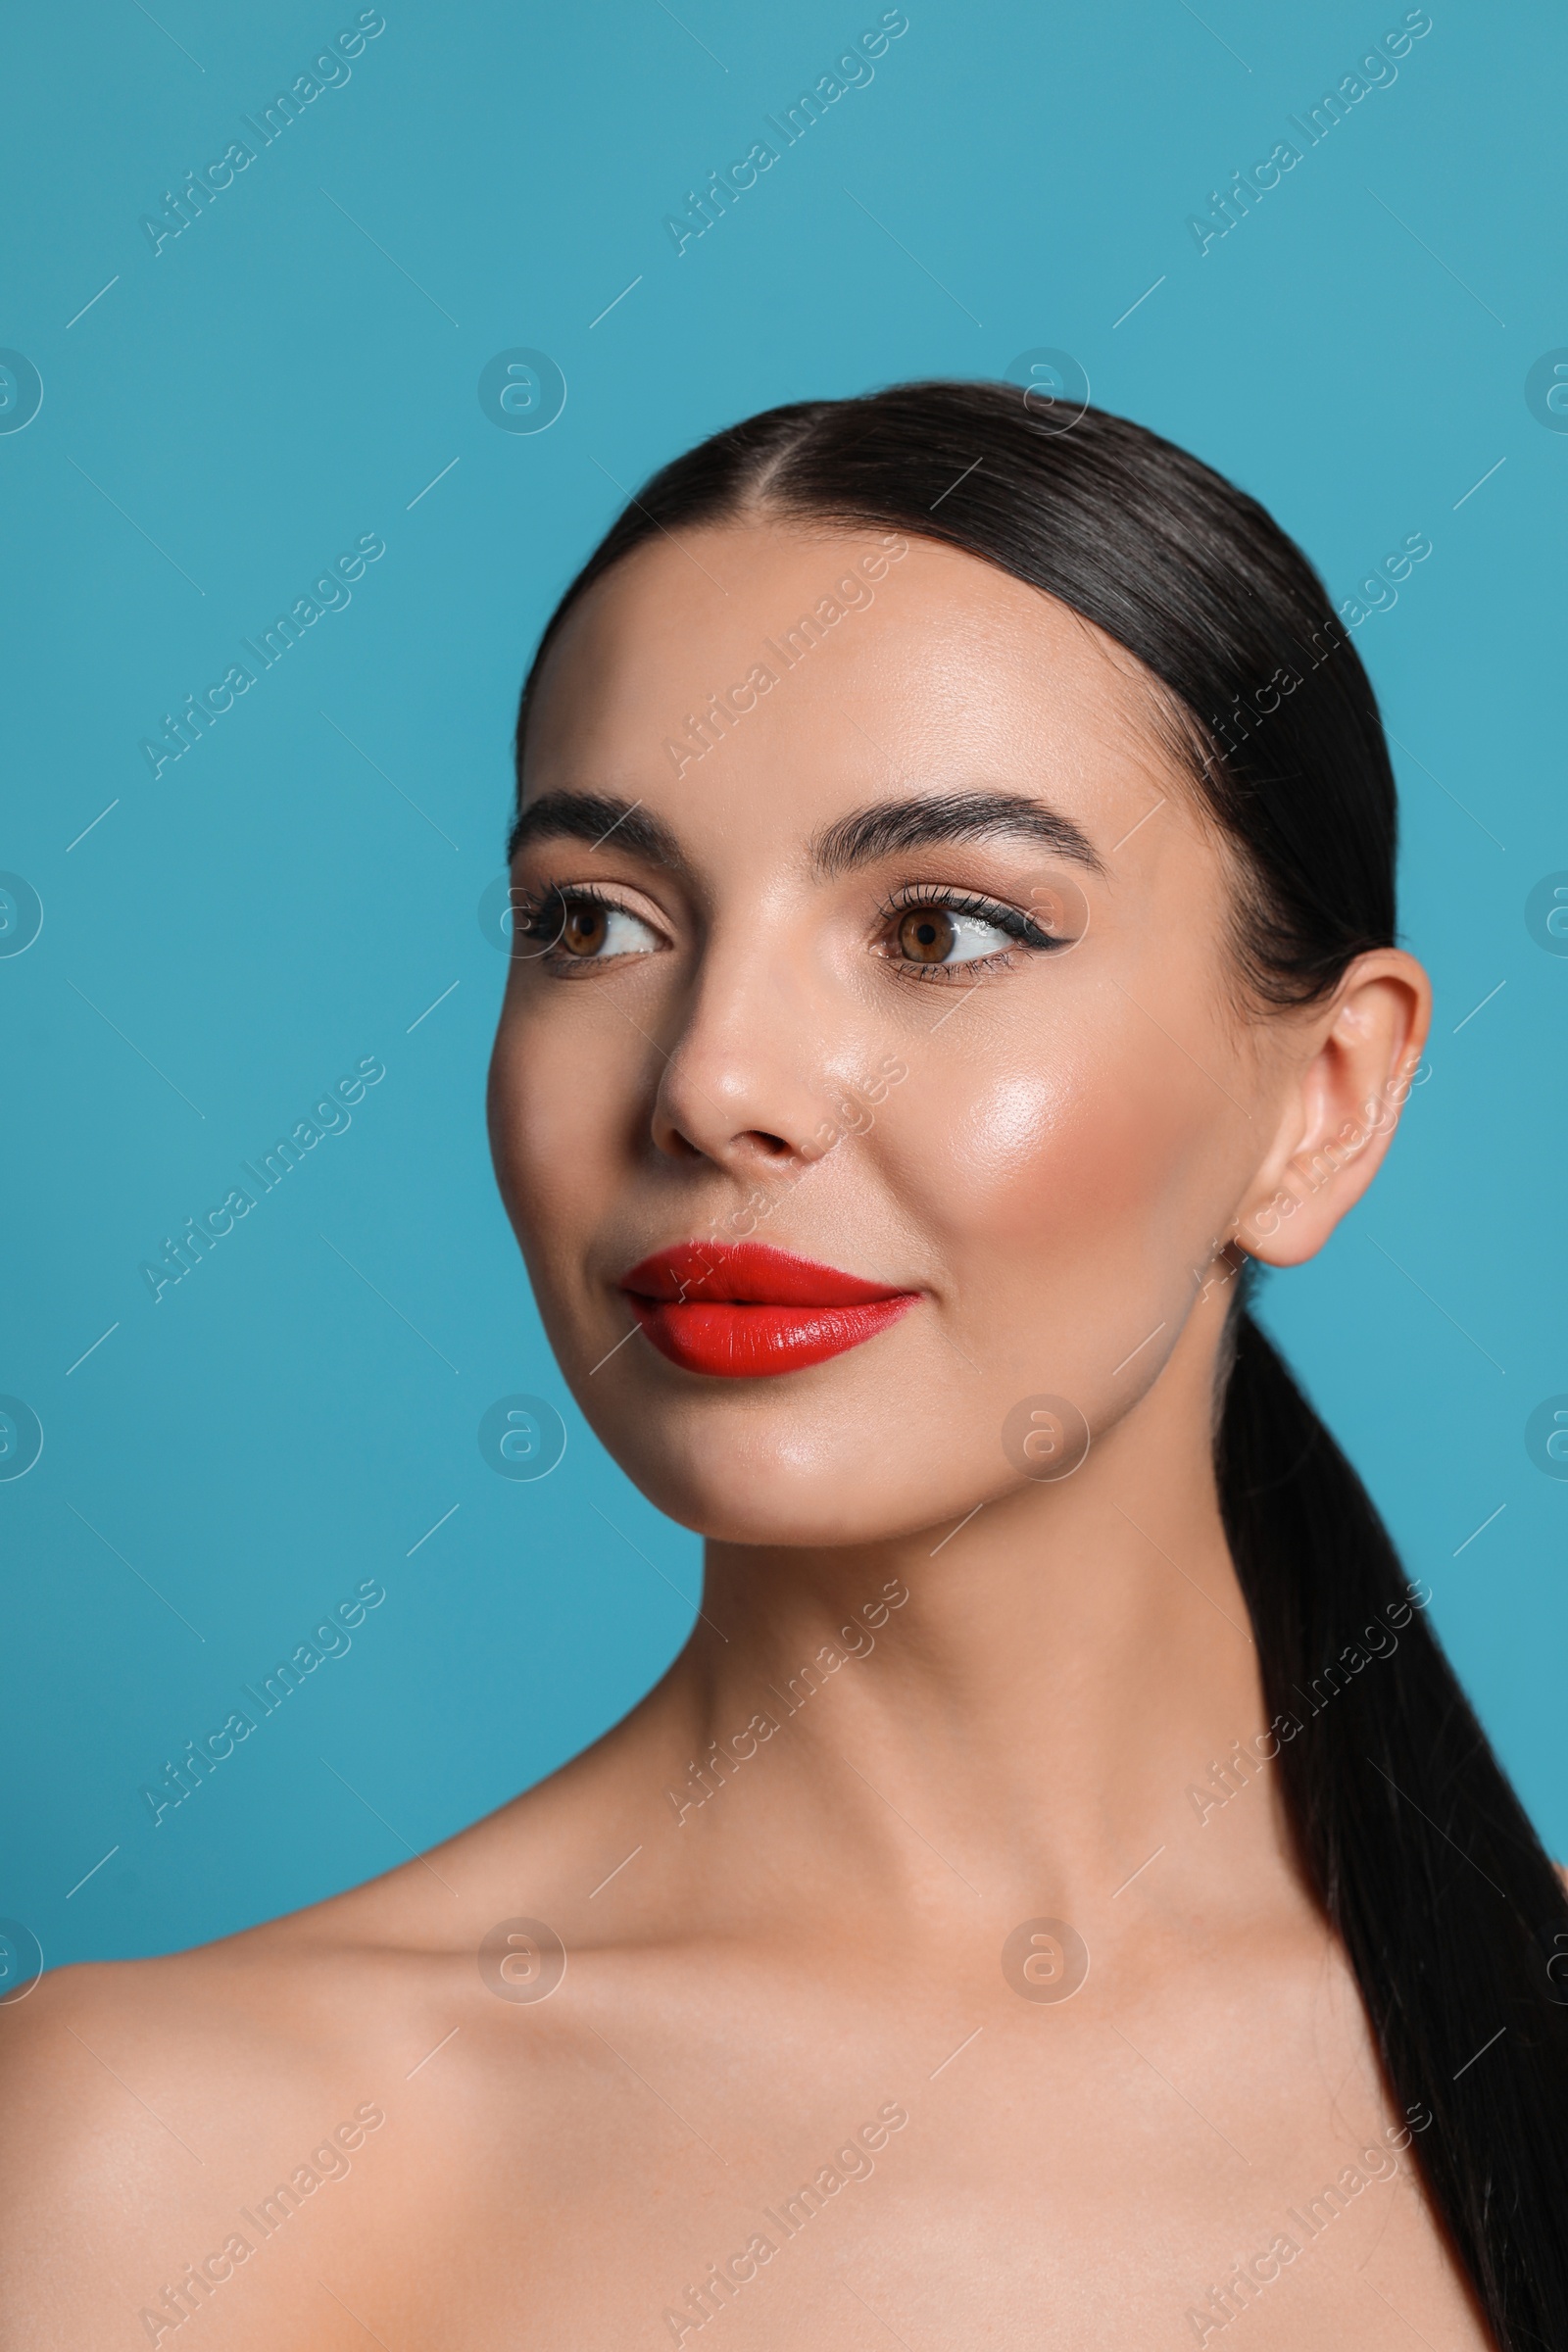 Photo of Attractive smiling woman against light blue background